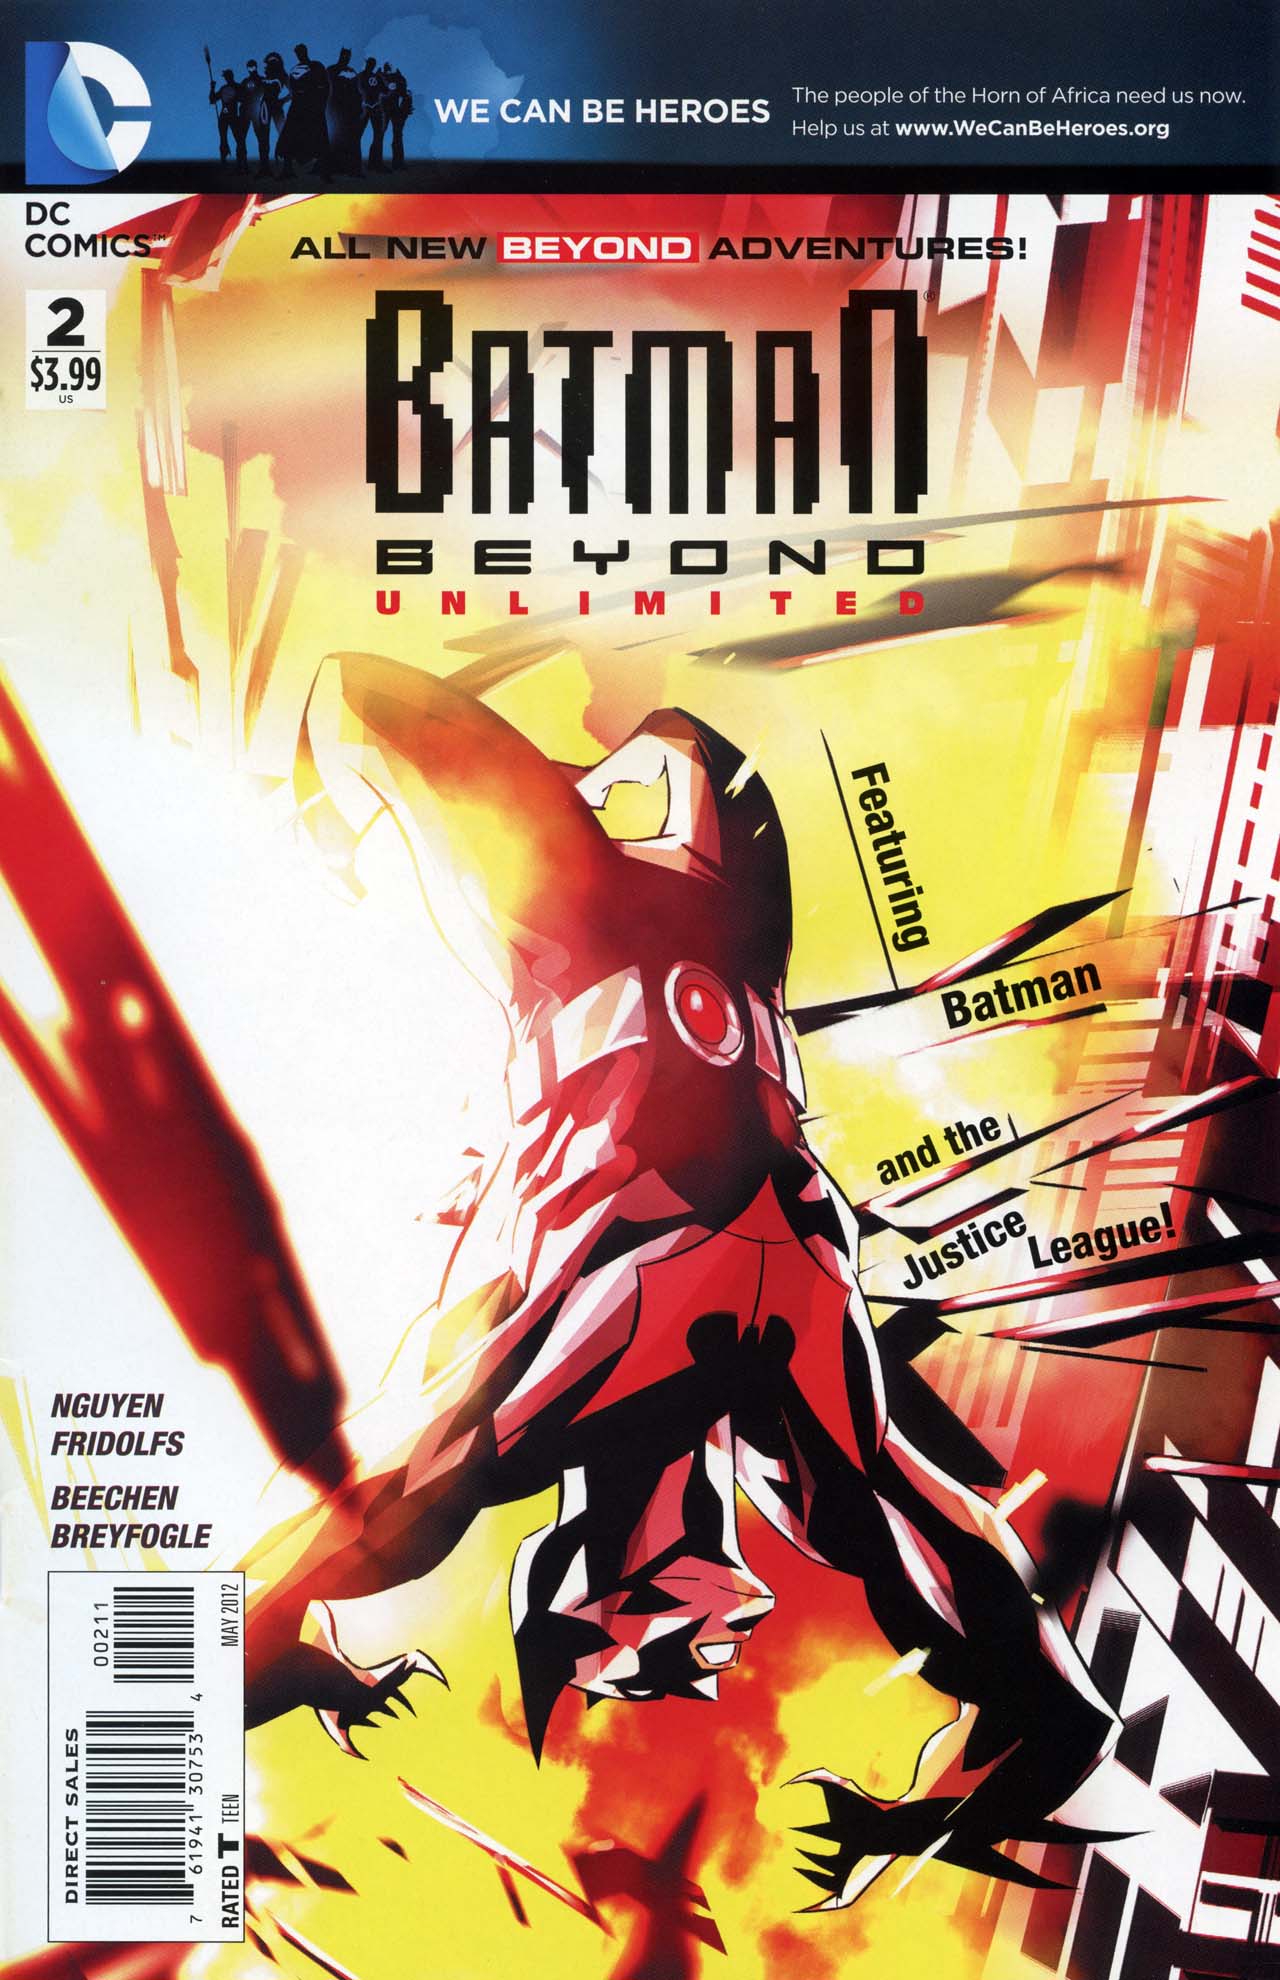 Batman Beyond Unlimited Issue 2 | Read Batman Beyond Unlimited Issue 2  comic online in high quality. Read Full Comic online for free - Read comics  online in high quality .|